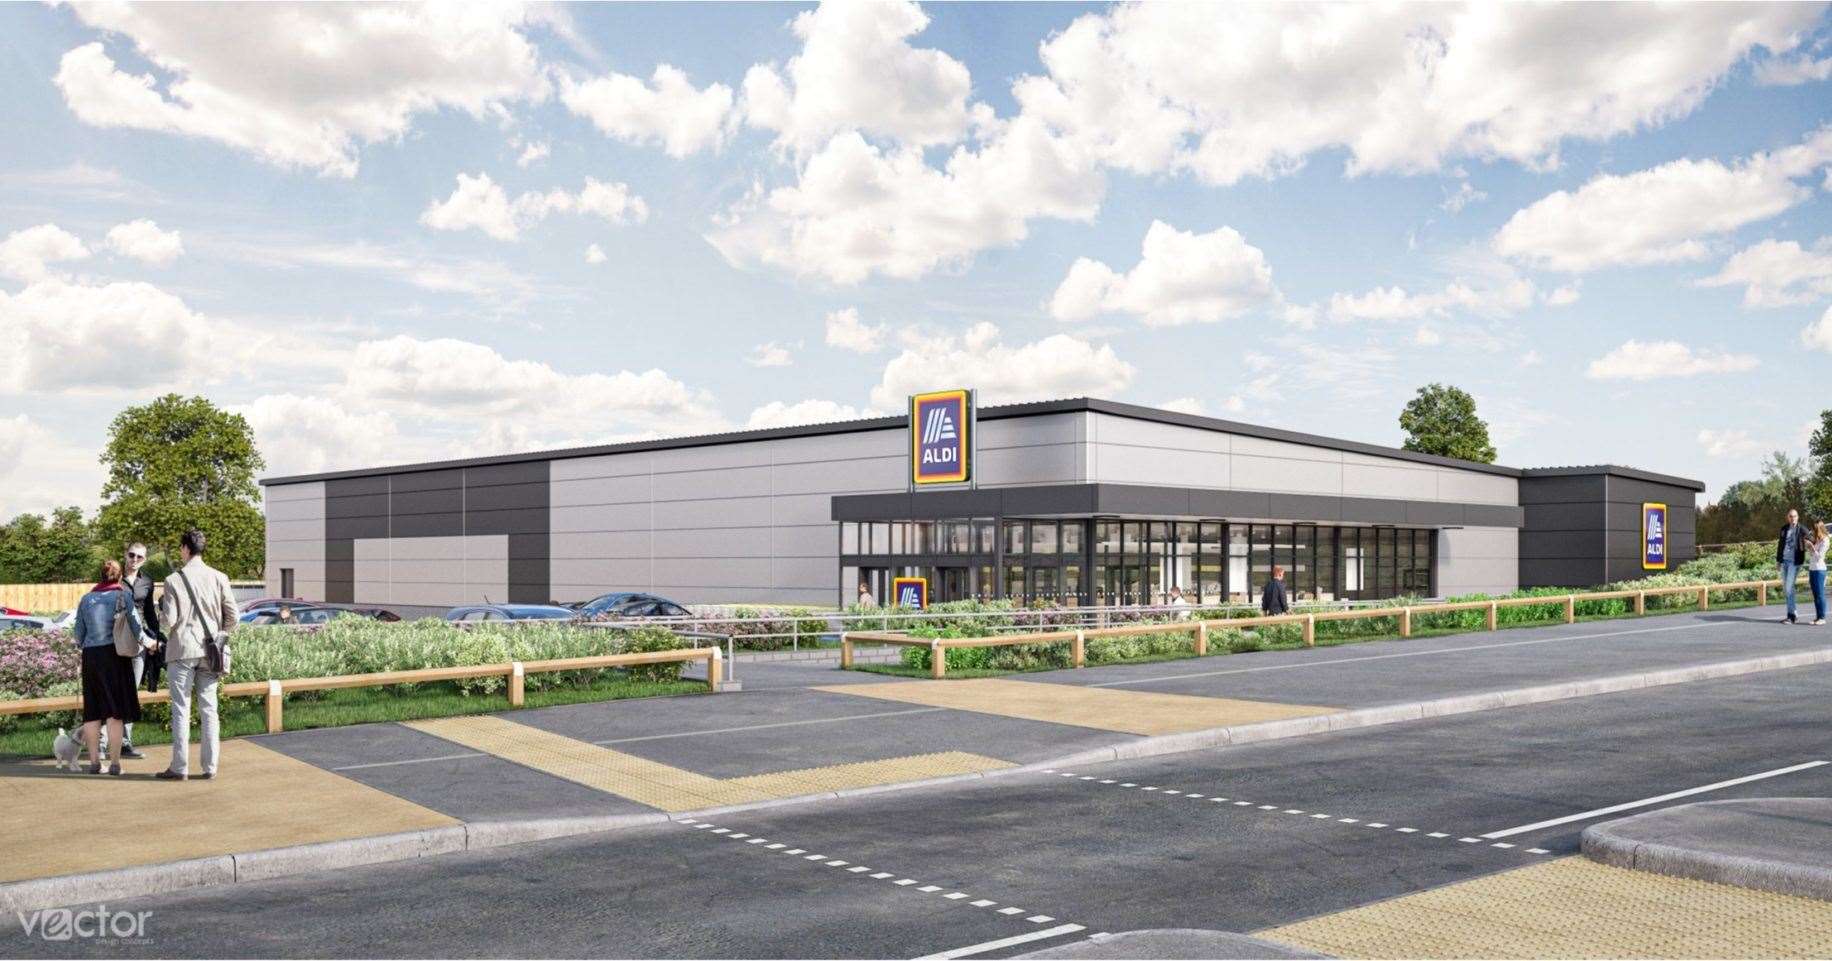 A CGI mock-up of how the new Aldi store could look